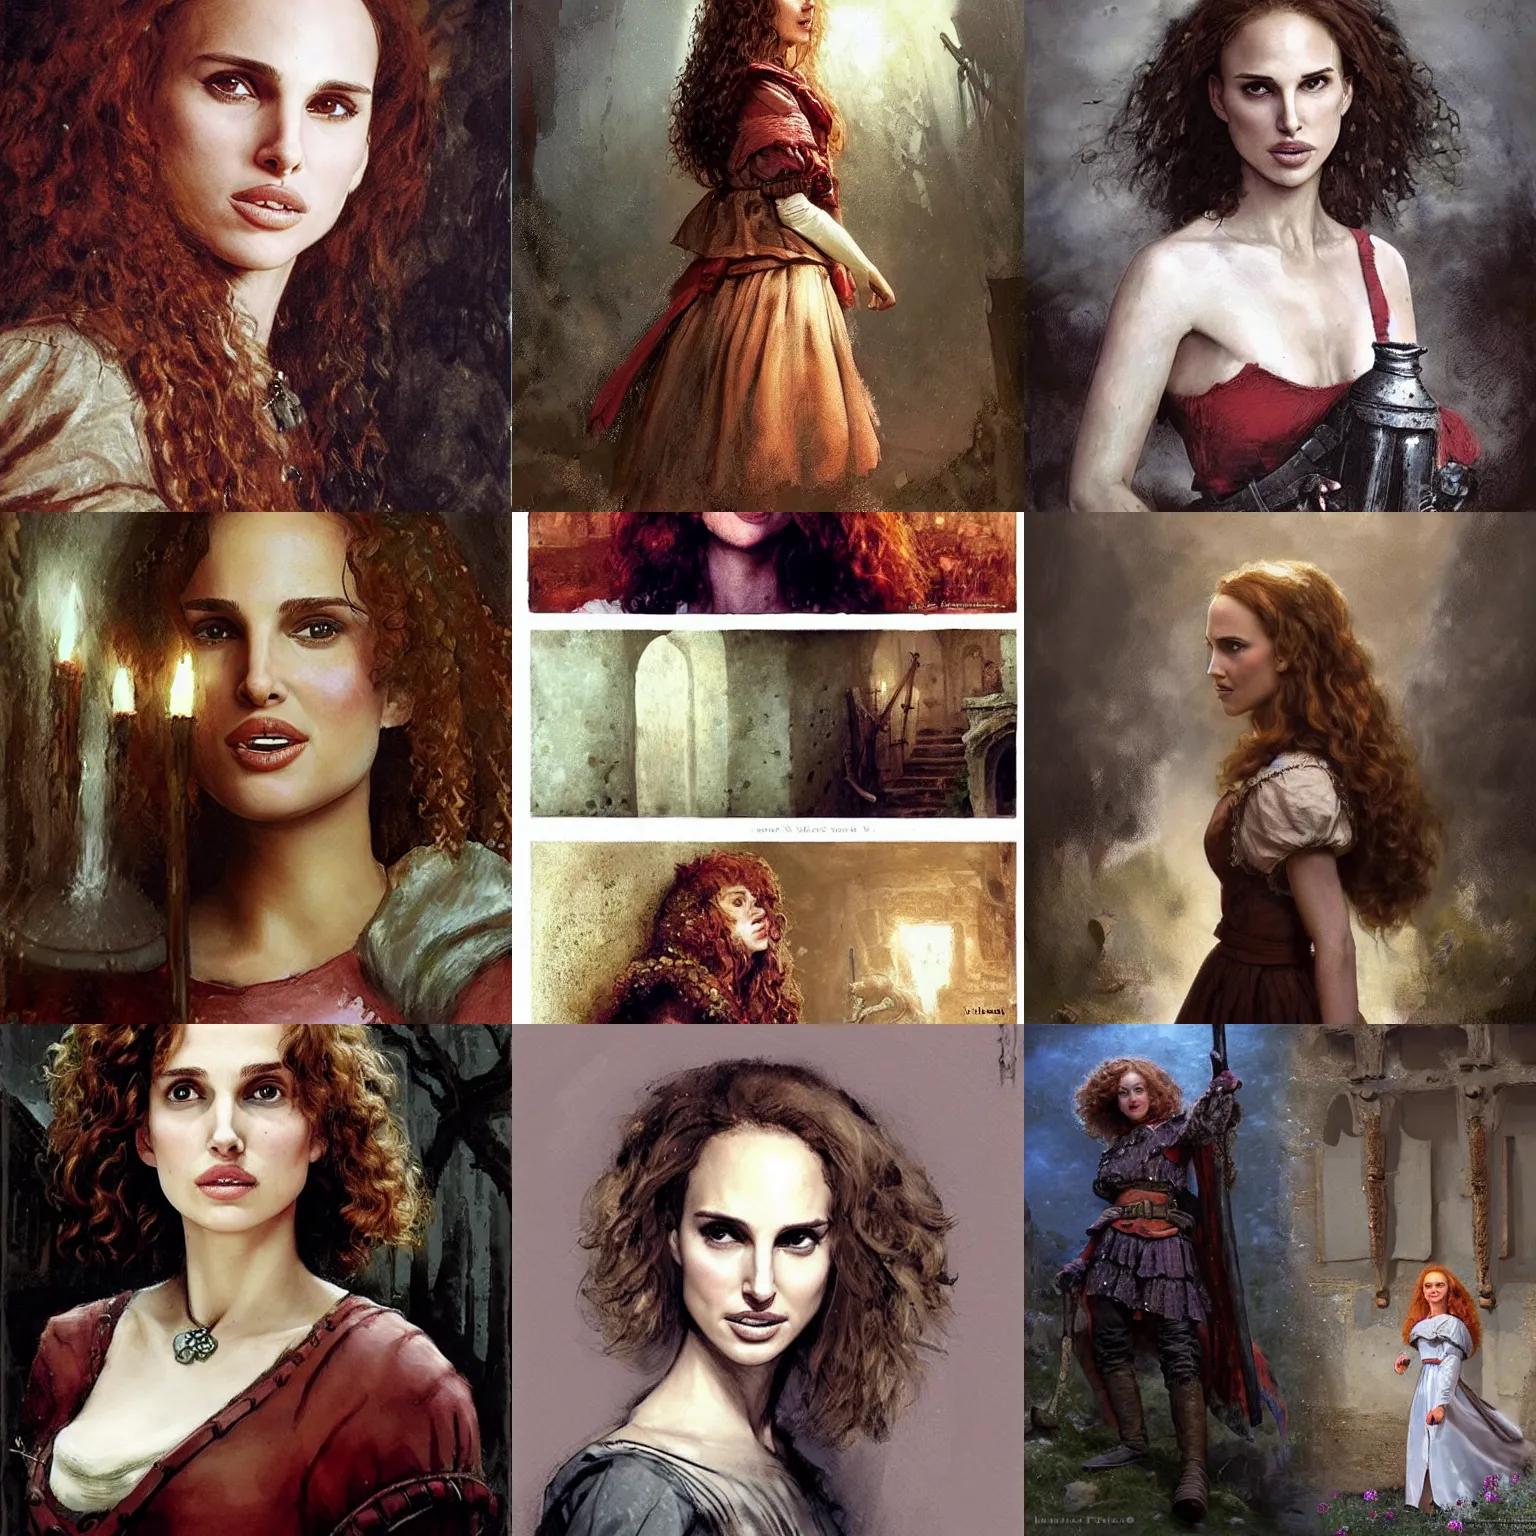 Prompt: young, freckled, curly haired, redhead natalie portman as a optimistic!, enthusiastic, giddy medieval innkeeper in a dark medieval inn. dark shadows, colorful, ( ( ( dim light ) ) ), law contrasts, fantasy concept art by jakub rozalski, jan matejko, and j. dickenson